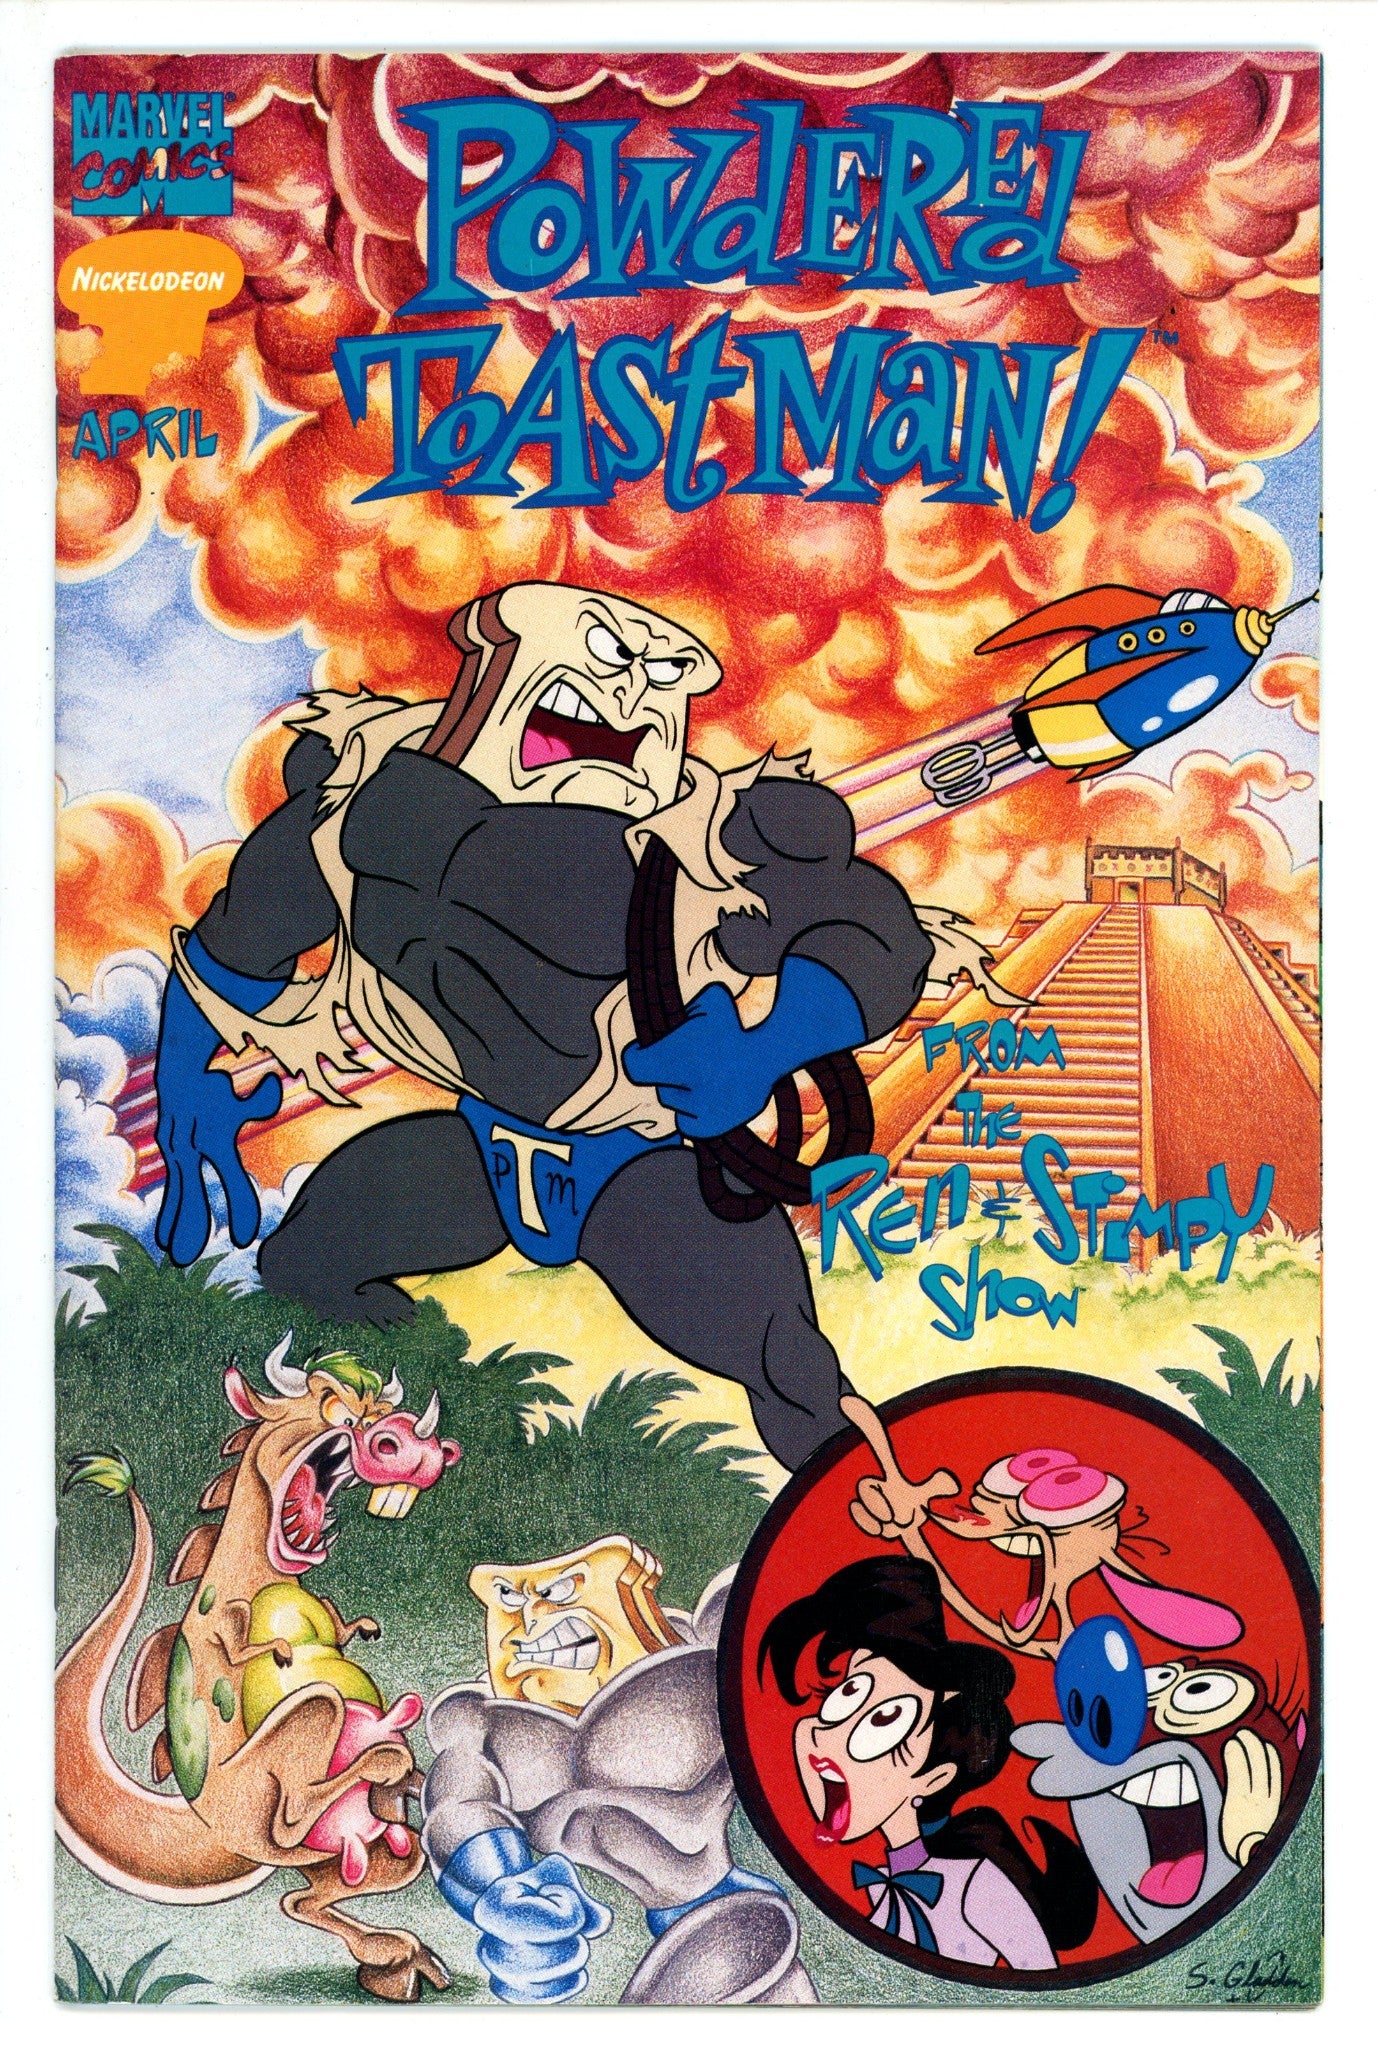 The Ren & Stimpy Show Special: Powdered Toastman's Cereal Serial [nn] Newsstand VF+ (1995)